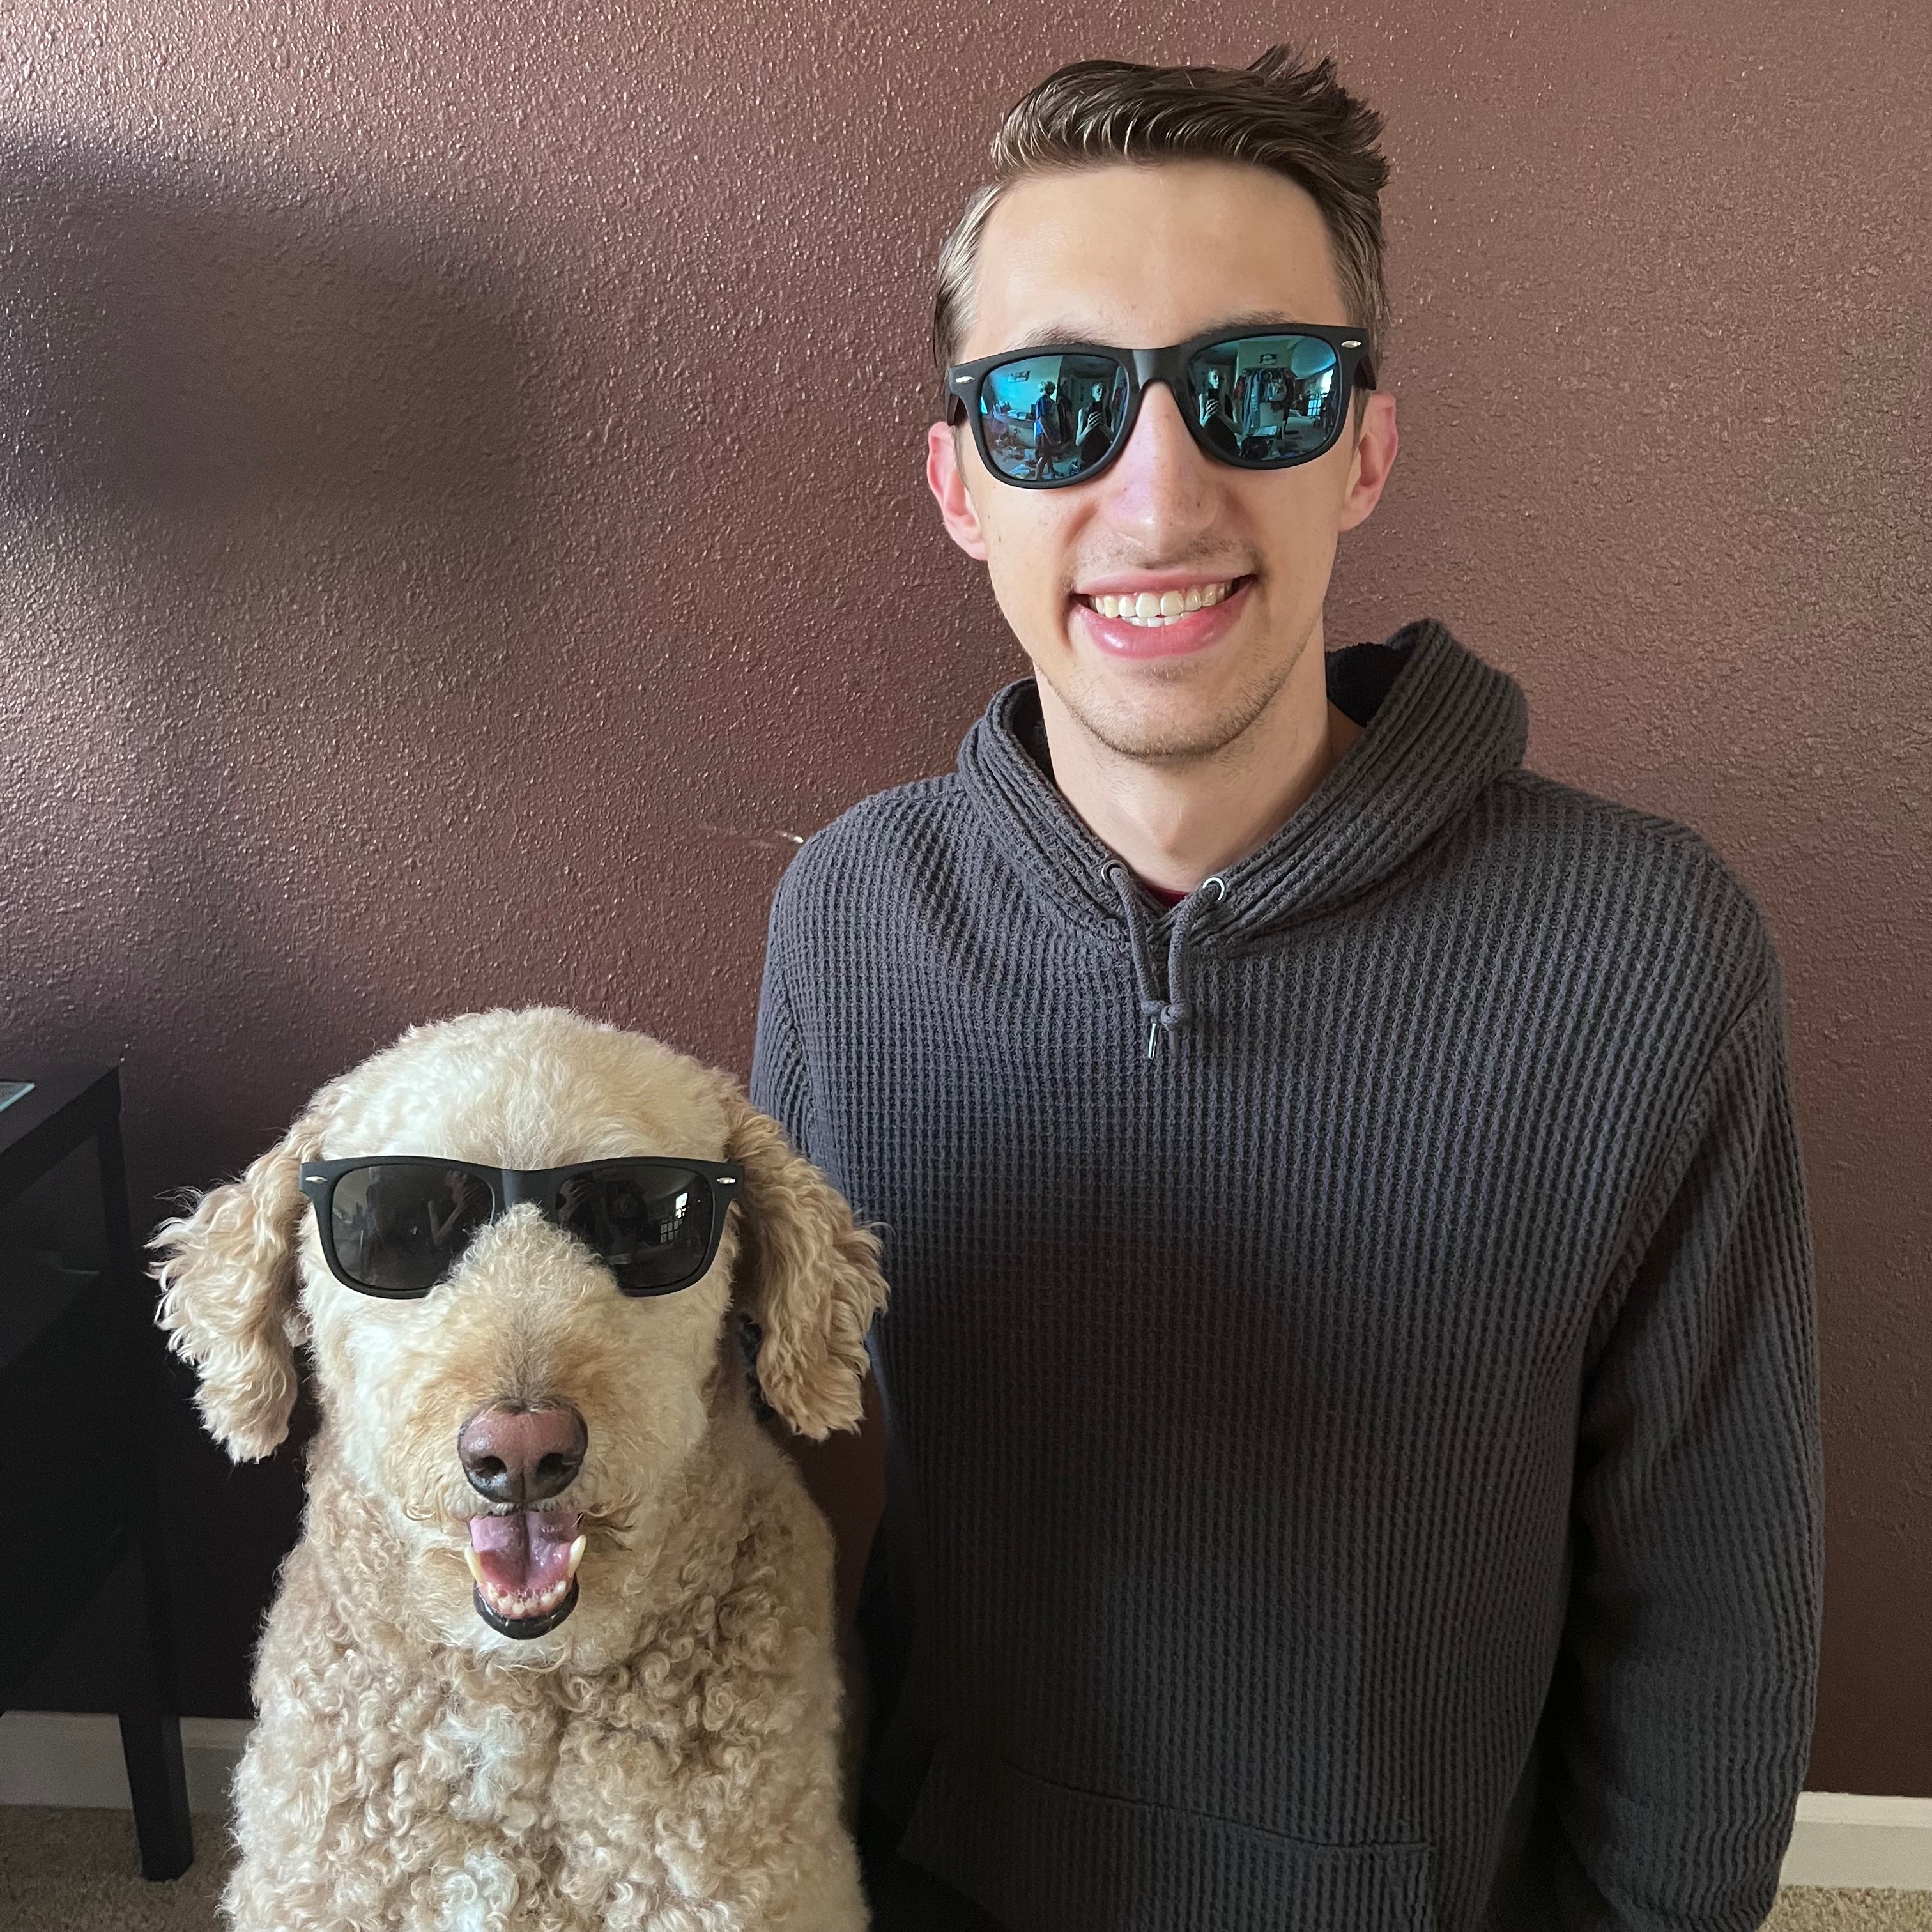 photo of a young man with brown hair and a tan-colored fluffy dog, both wearing sunglasses